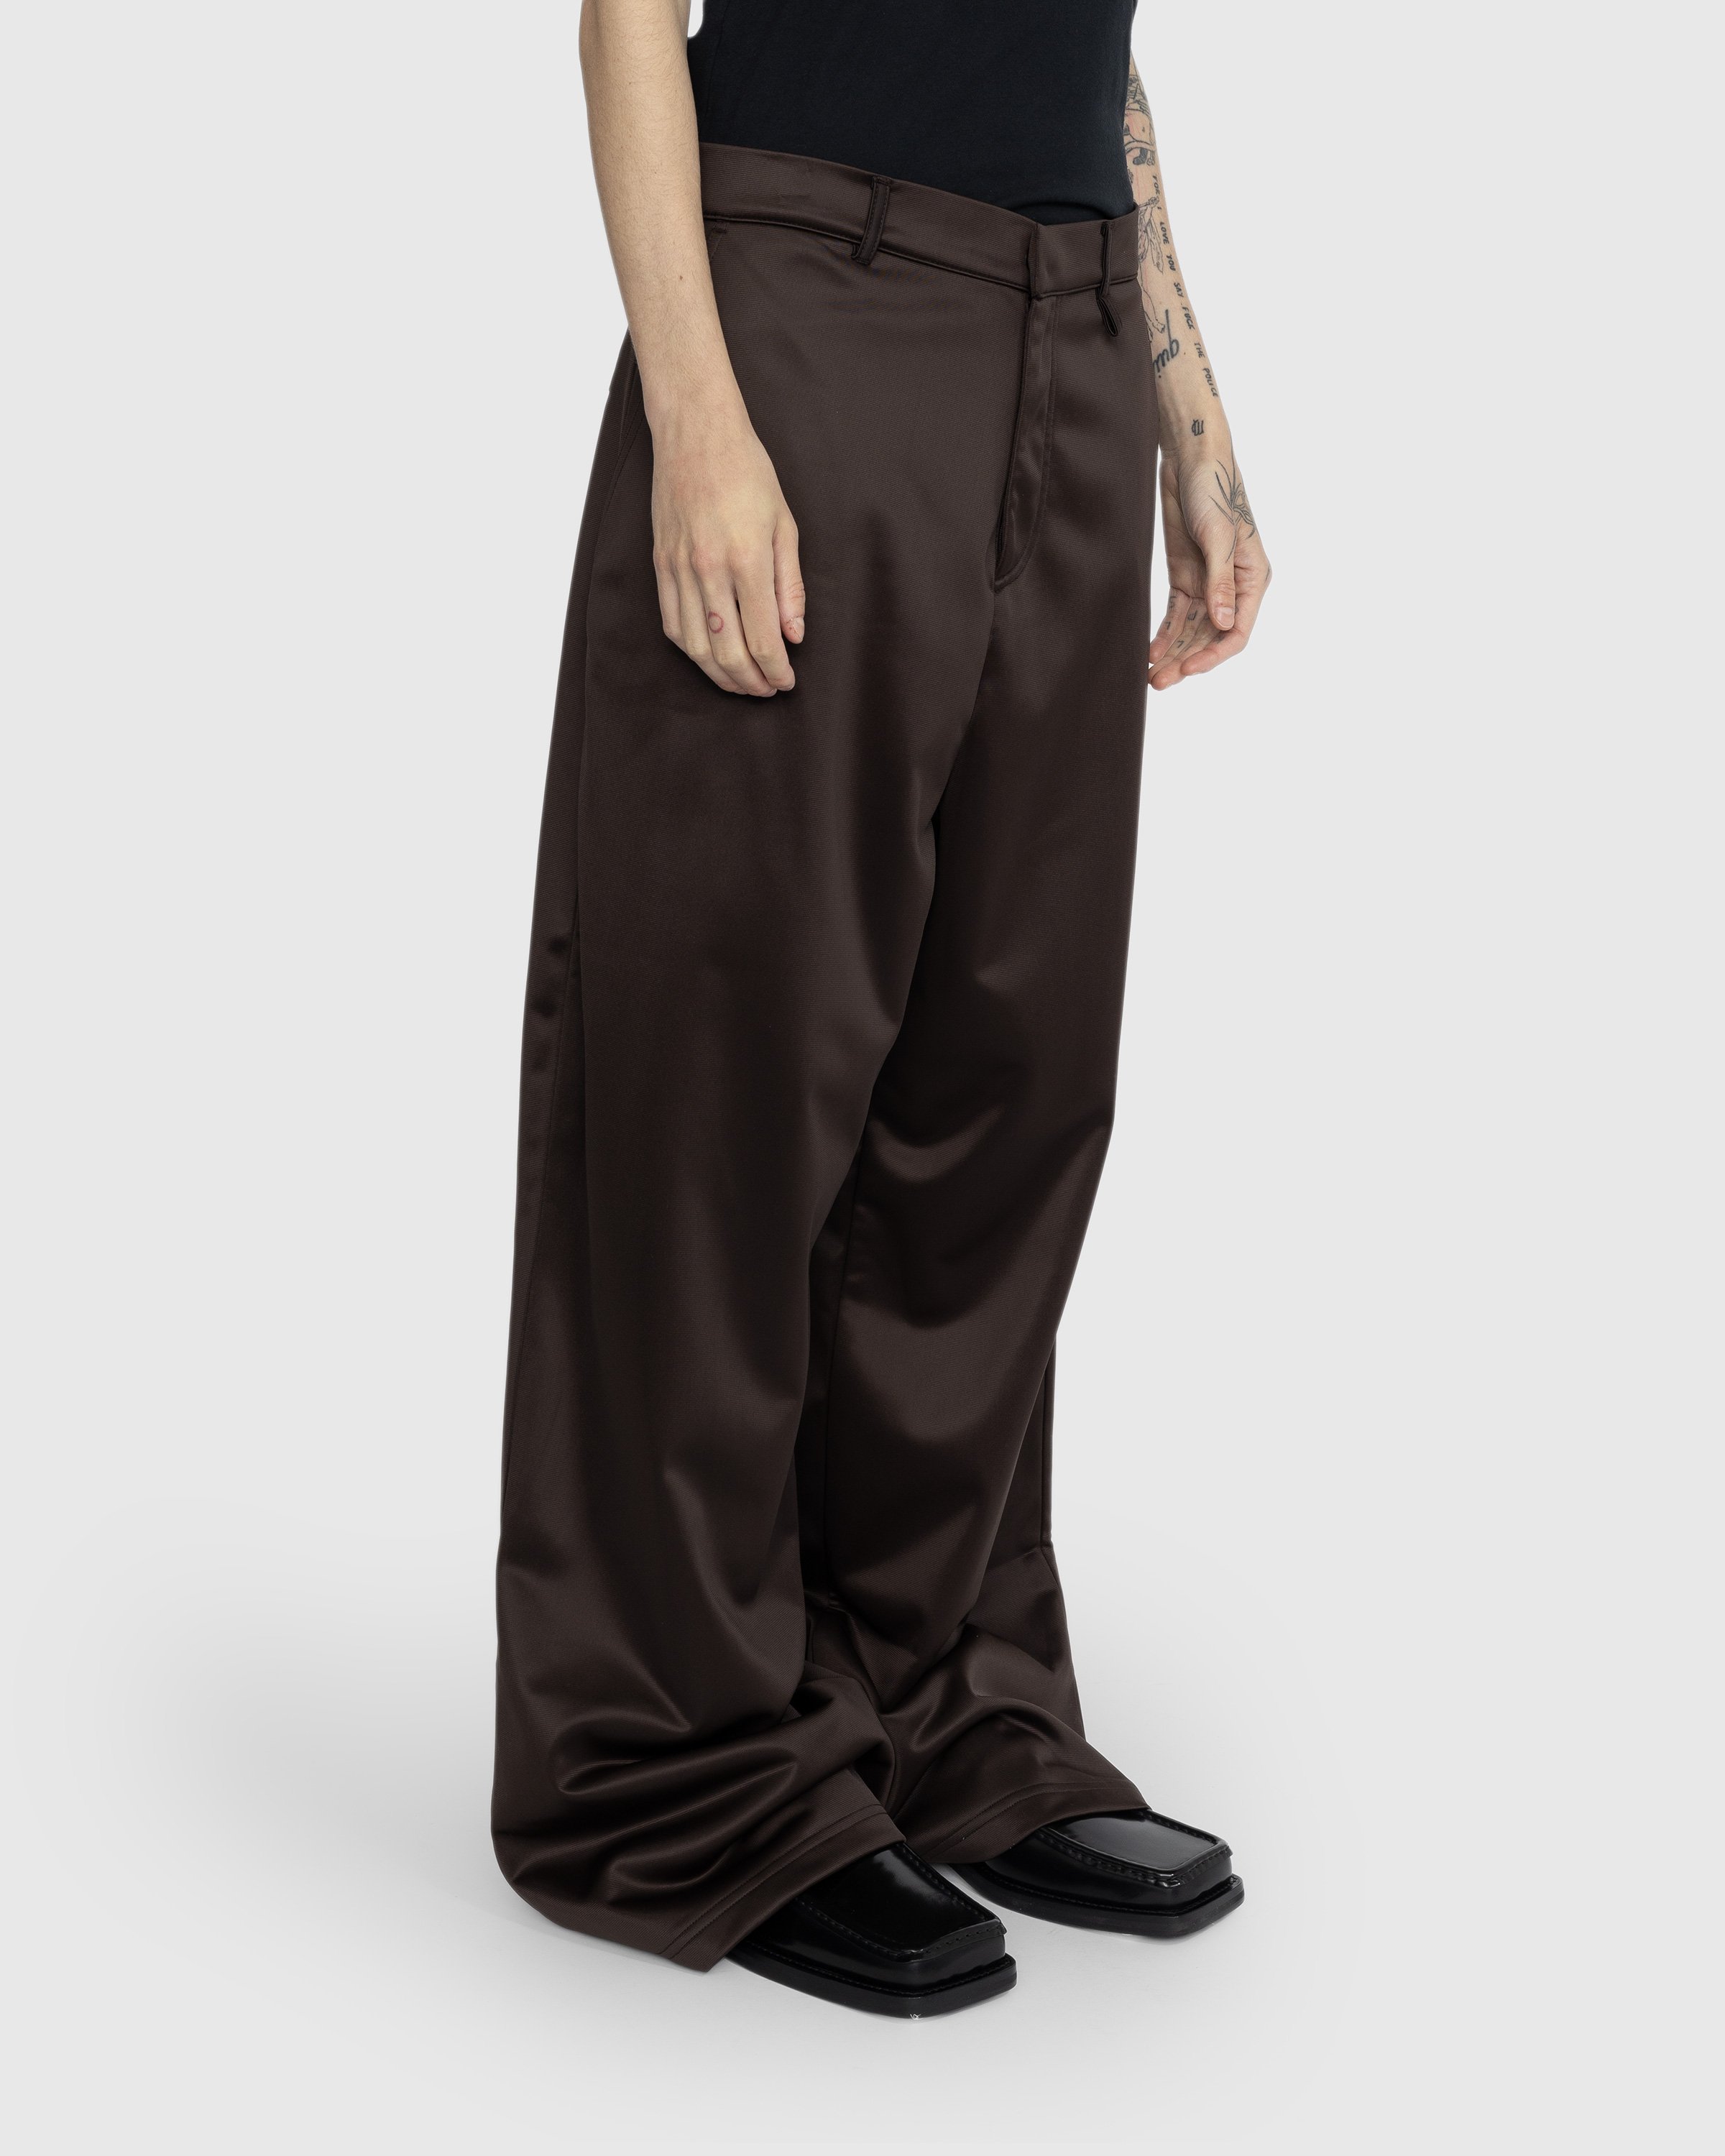 Martine Rose - Oversized Trackpant Brown - Clothing - Brown - Image 4